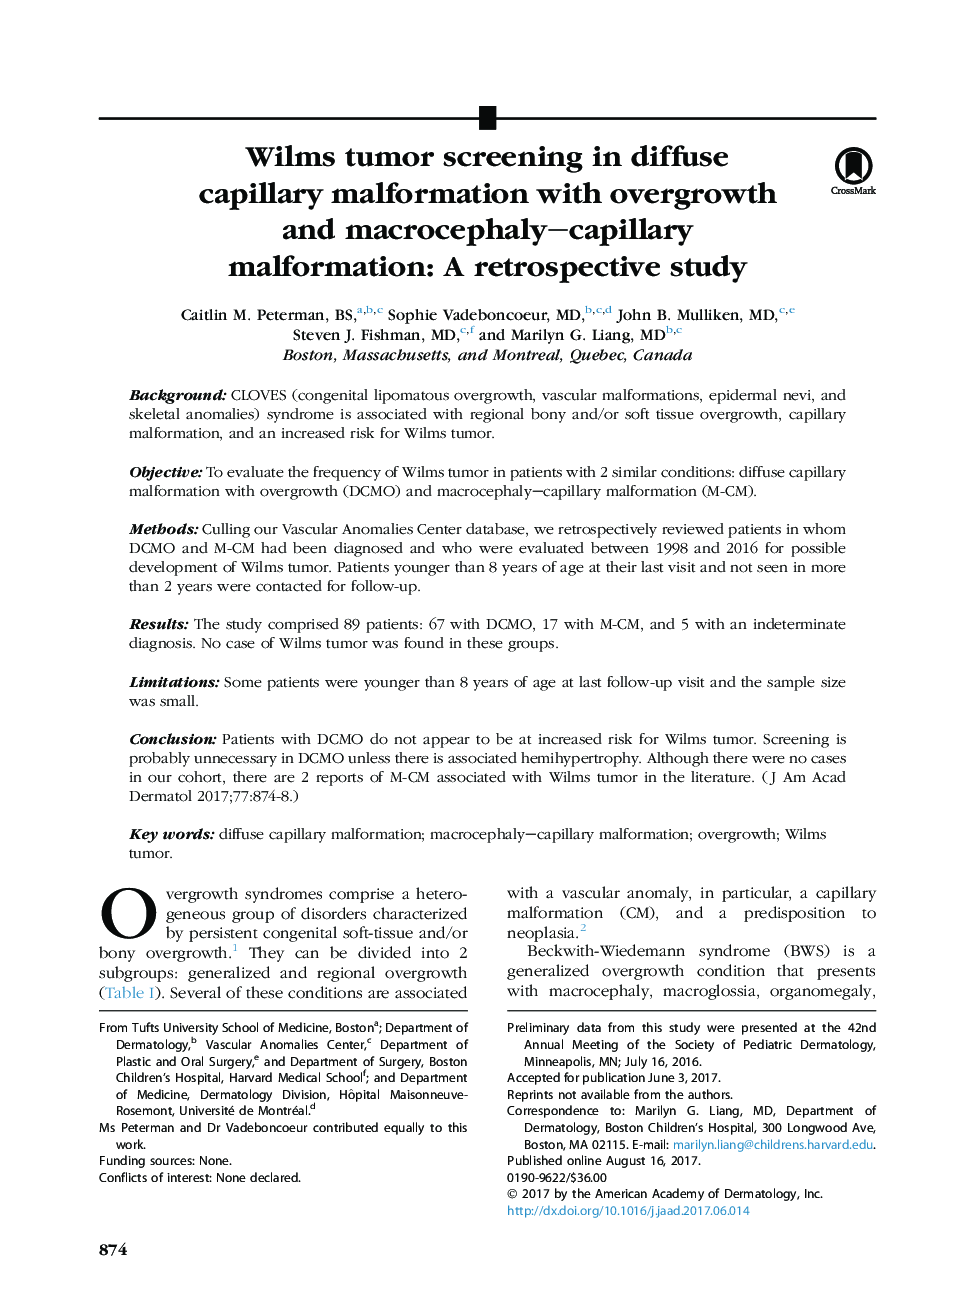 Wilms tumor screening in diffuse capillary malformation with overgrowth and macrocephaly-capillary malformation: A retrospective study